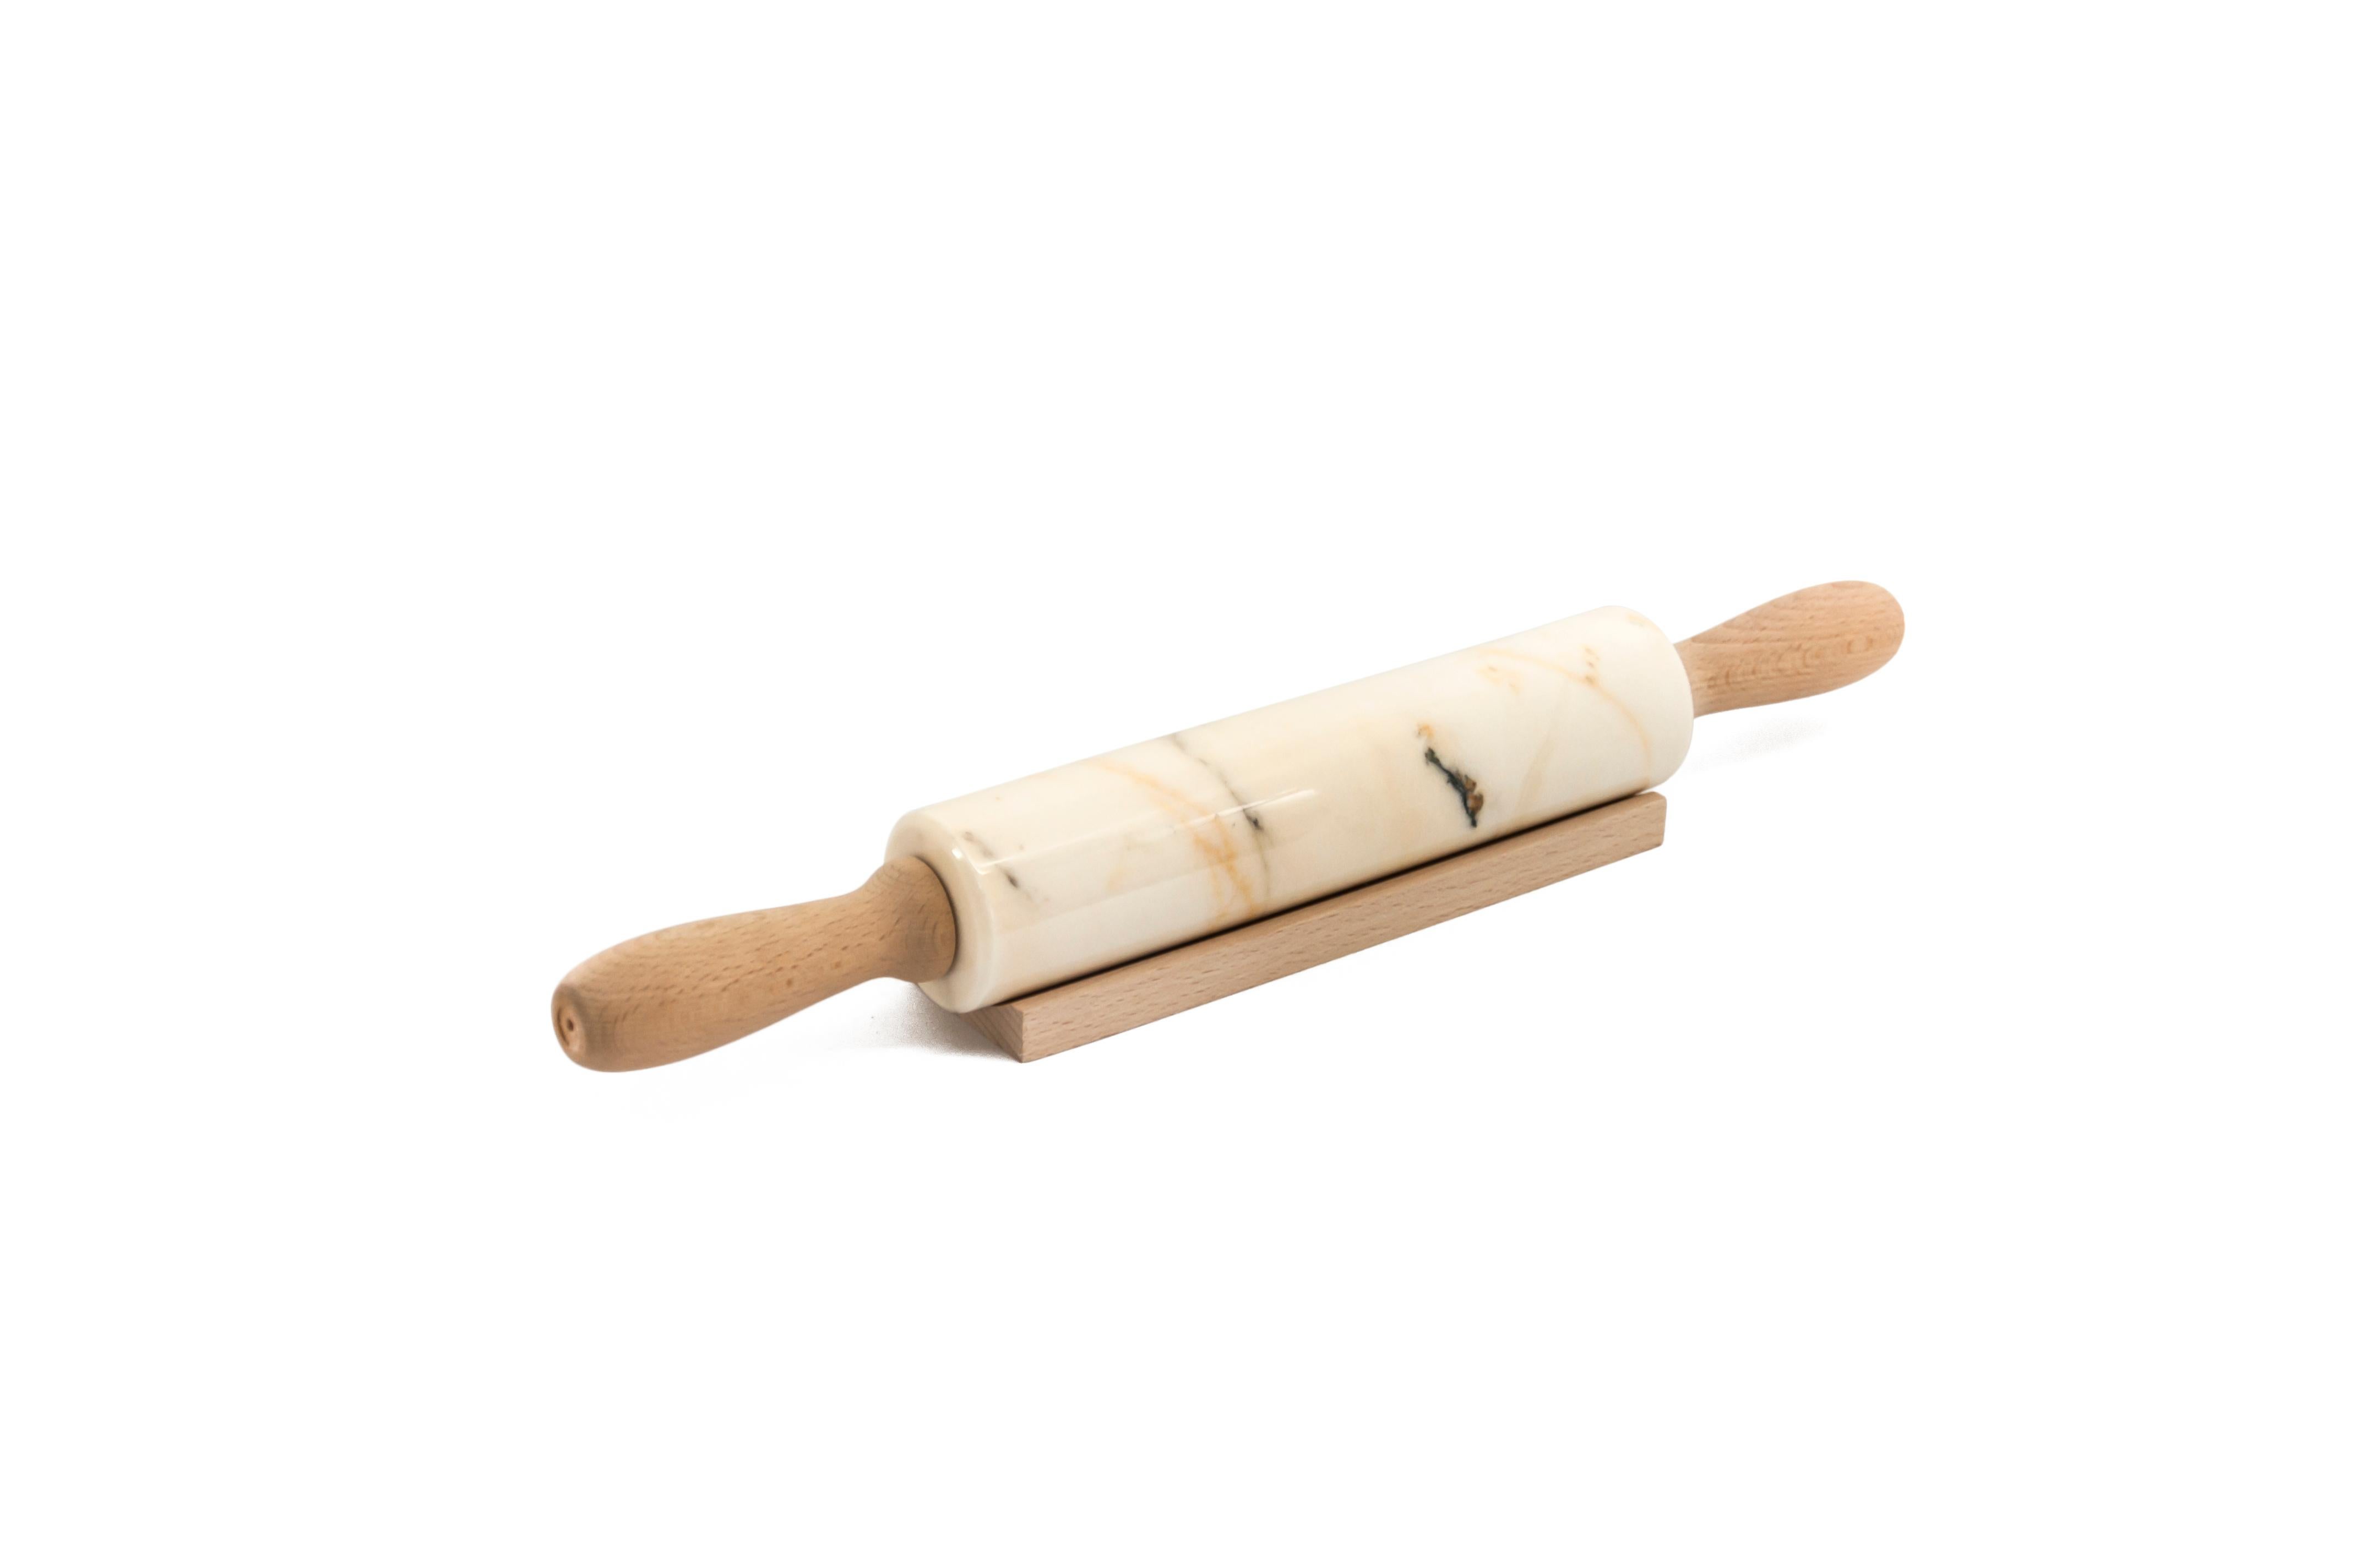 Paonazzo marble rolling pin with wooden handles. It is assembled manually. Each piece is in a way unique (every marble block is different in veins and shades) and handmade by Italian artisans specialized over generations in processing marble. Slight